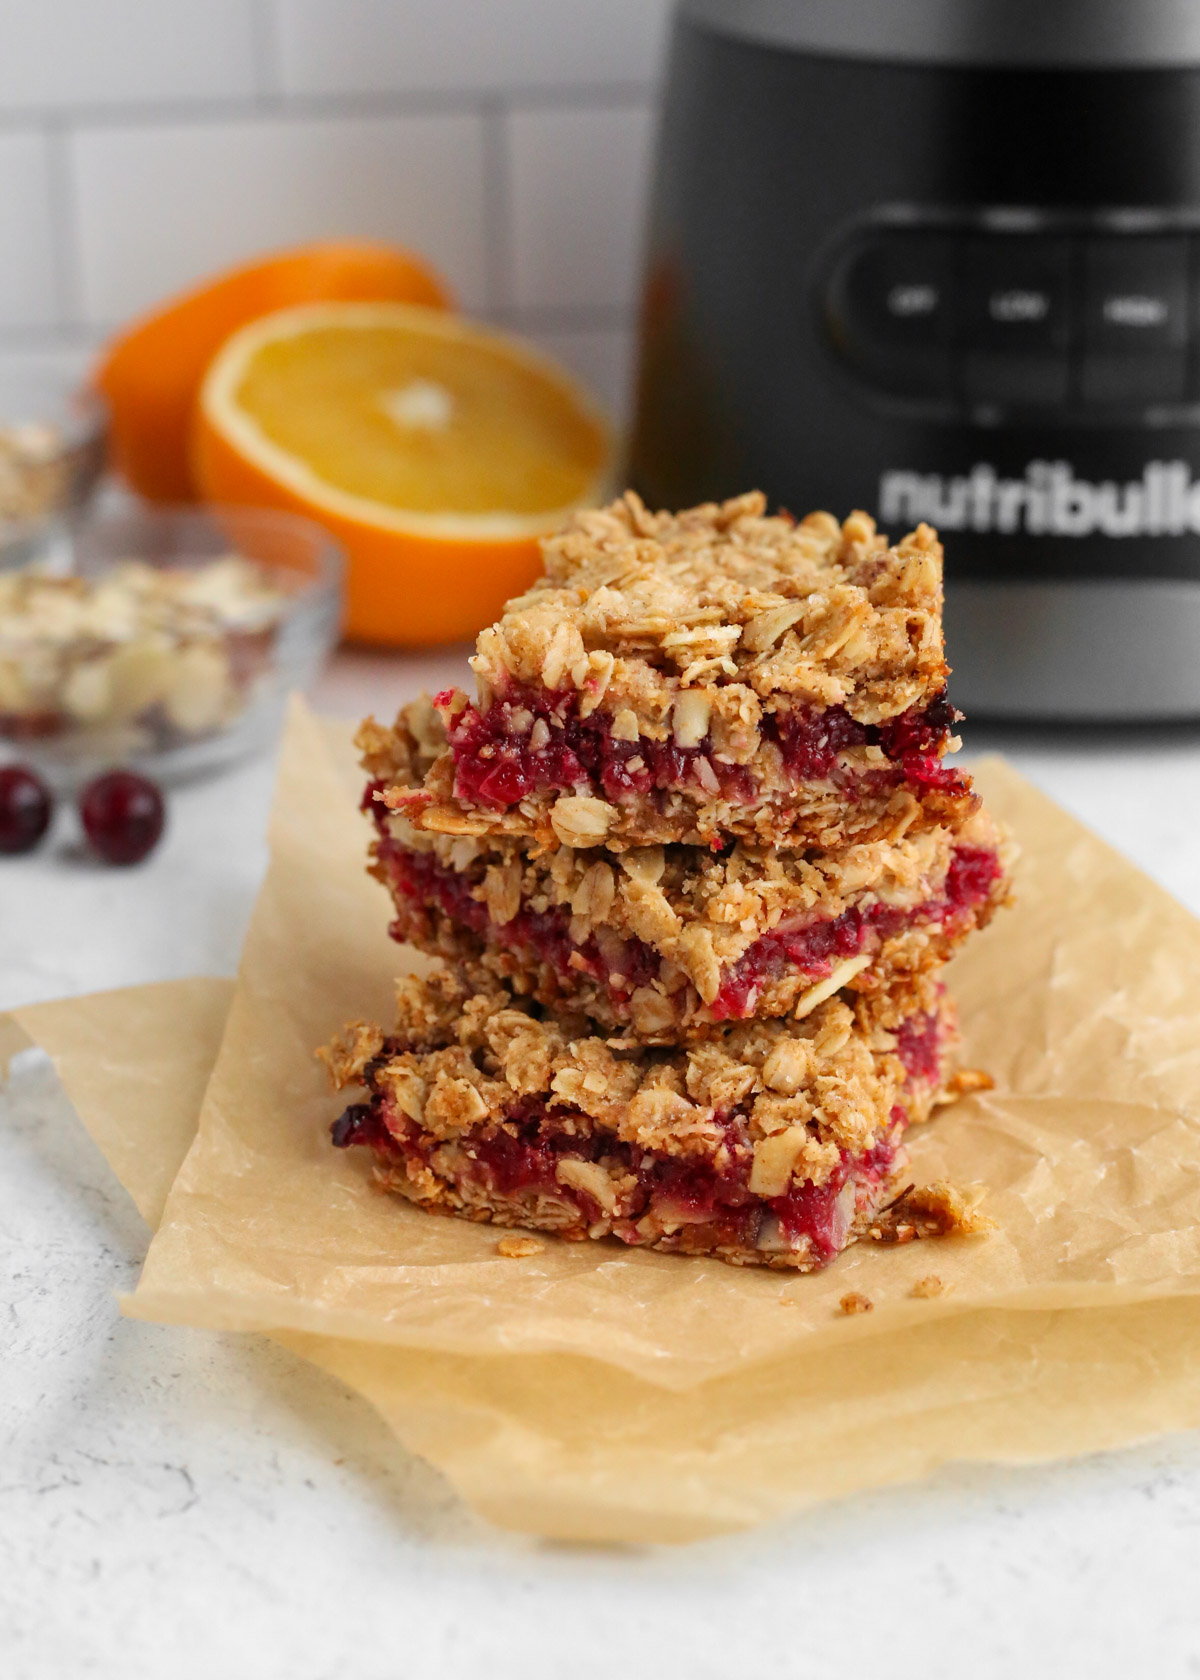 A stack of three orange cranberry oat bars on parchment paper, arranged in front of a food processor, sliced oranges, and loose cranberries